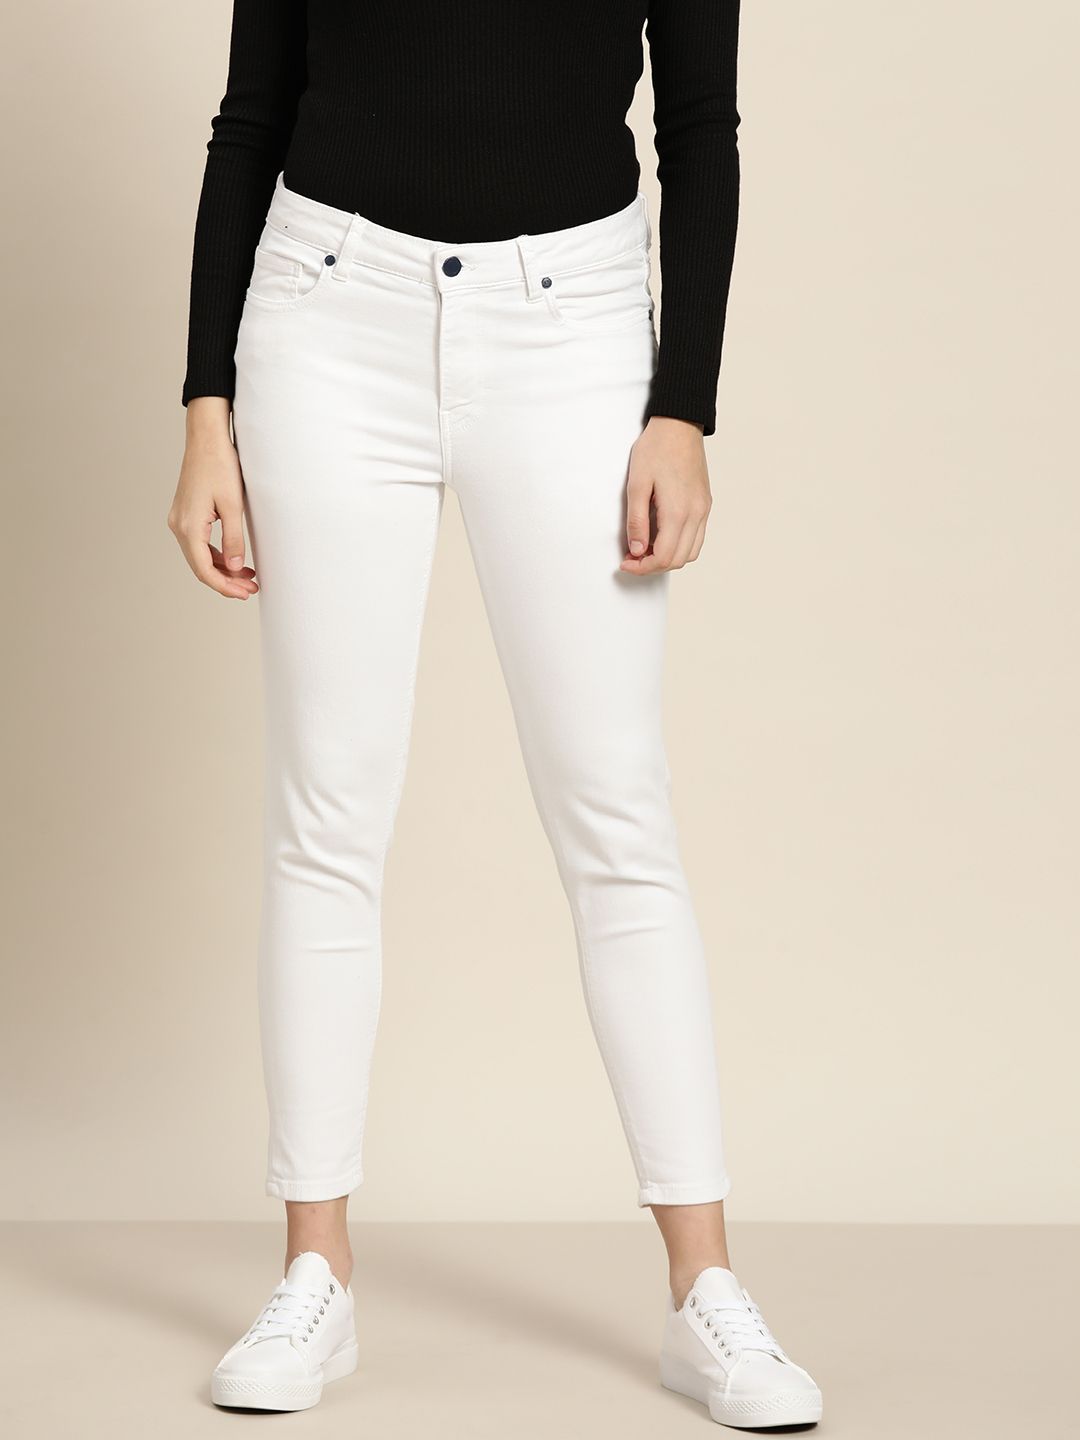 ether Women White Skinny Fit Stretchable Jeans Price in India